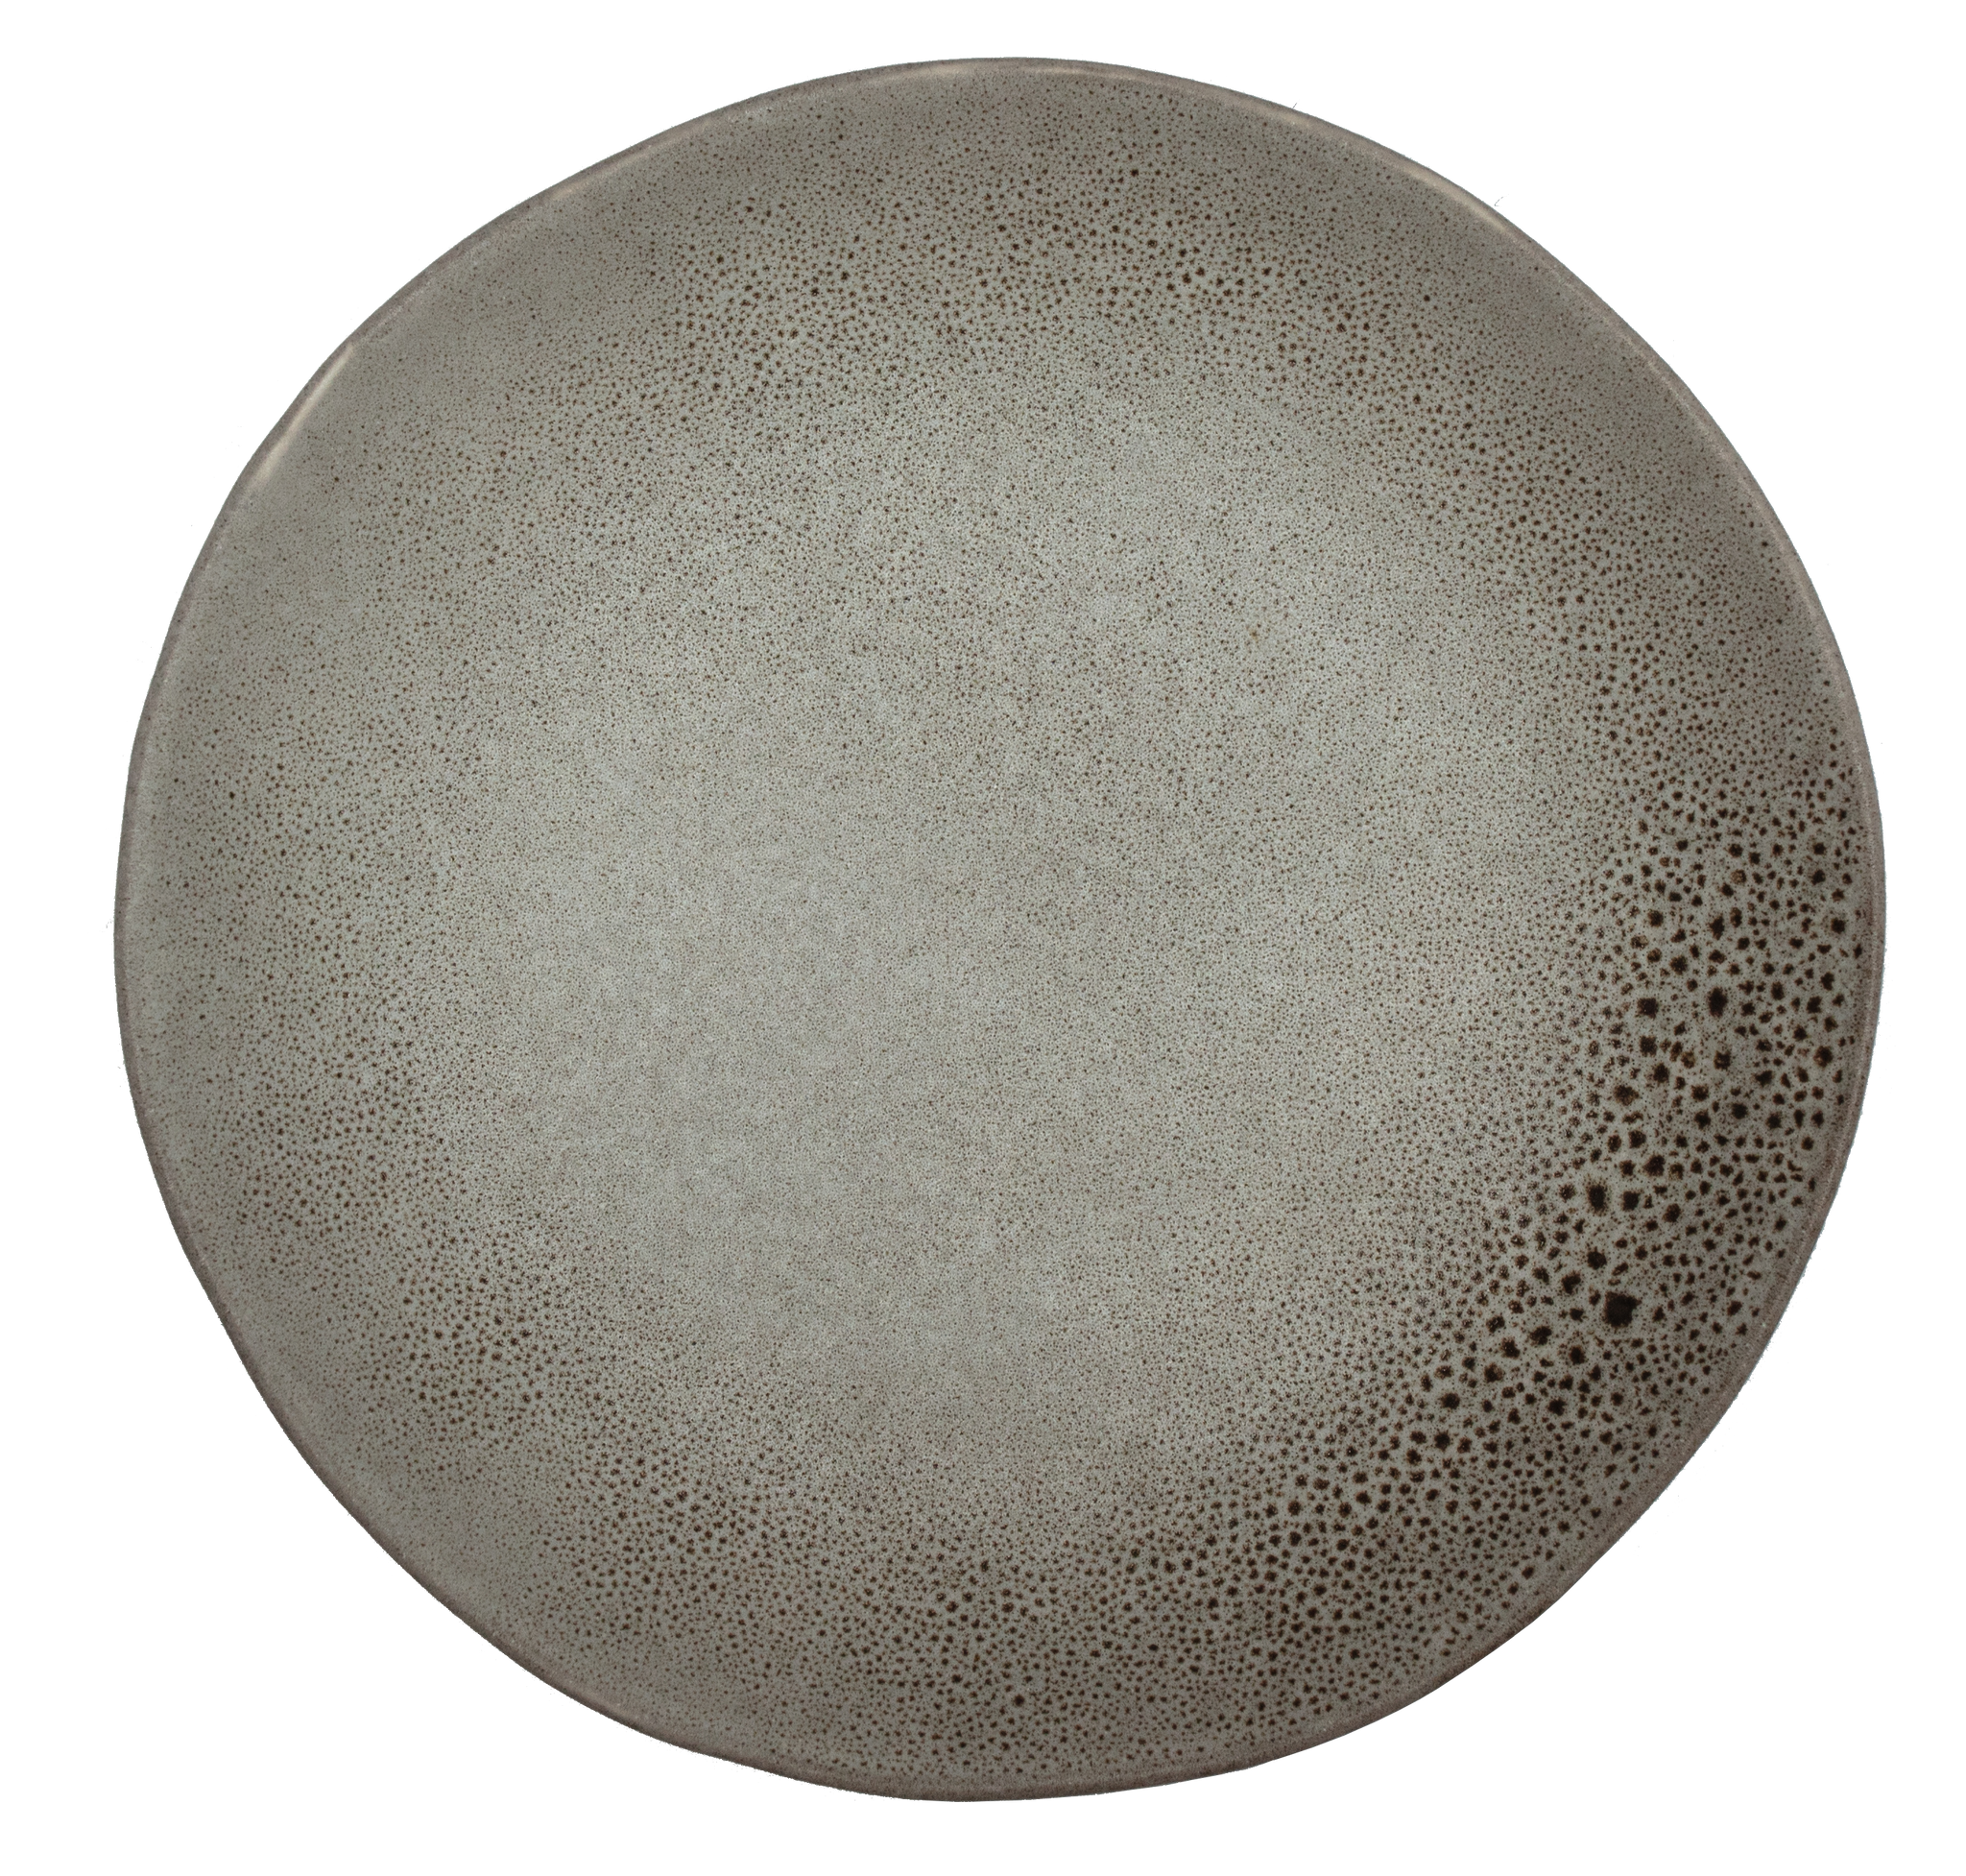 Moonlight Grey- Coupe Plate 21cm